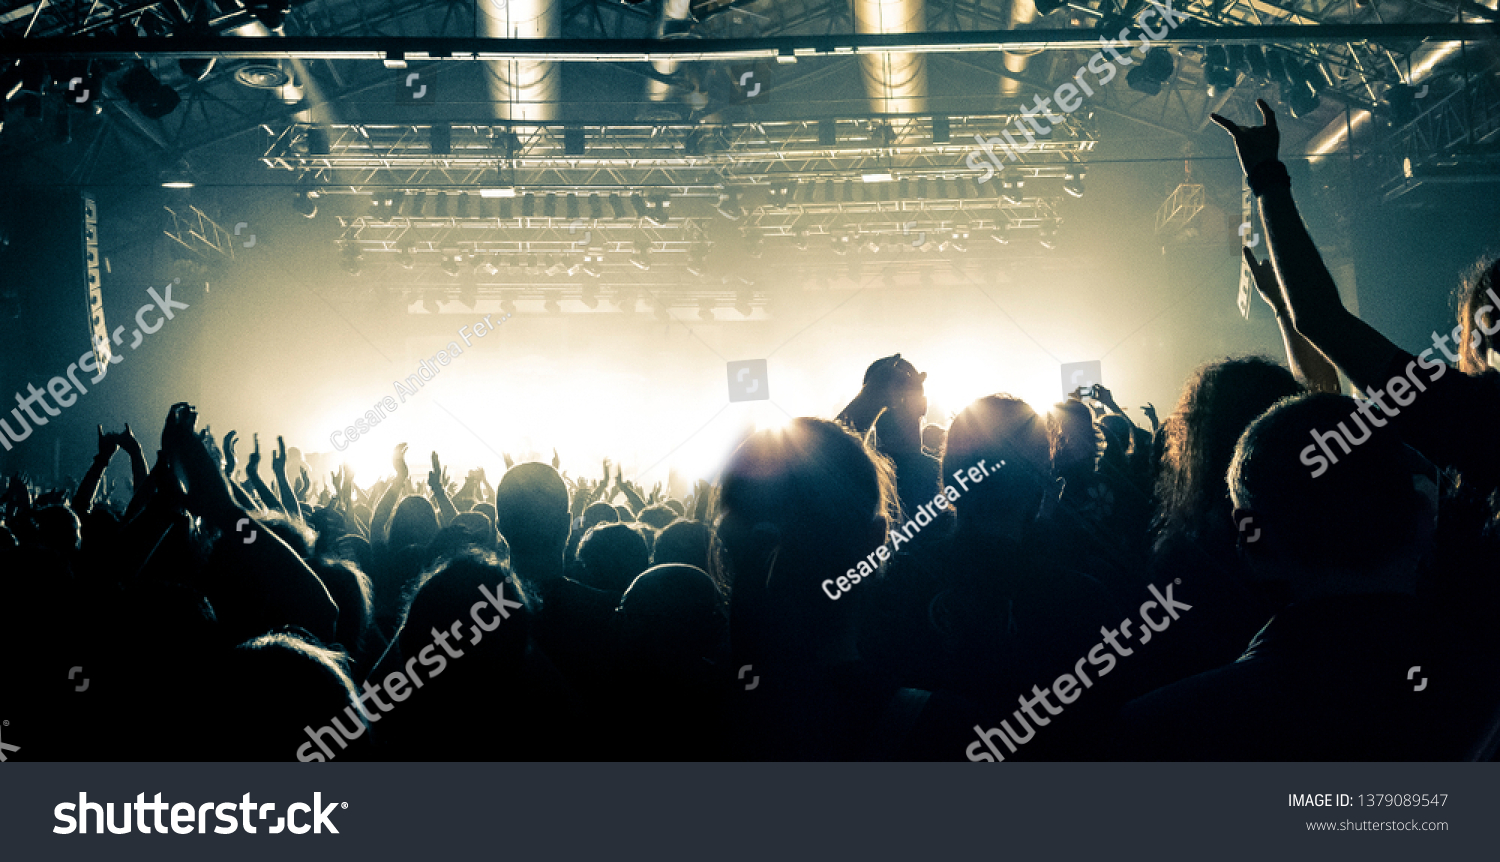 Party night in a concert hall, people silhouettes are visible #1379089547